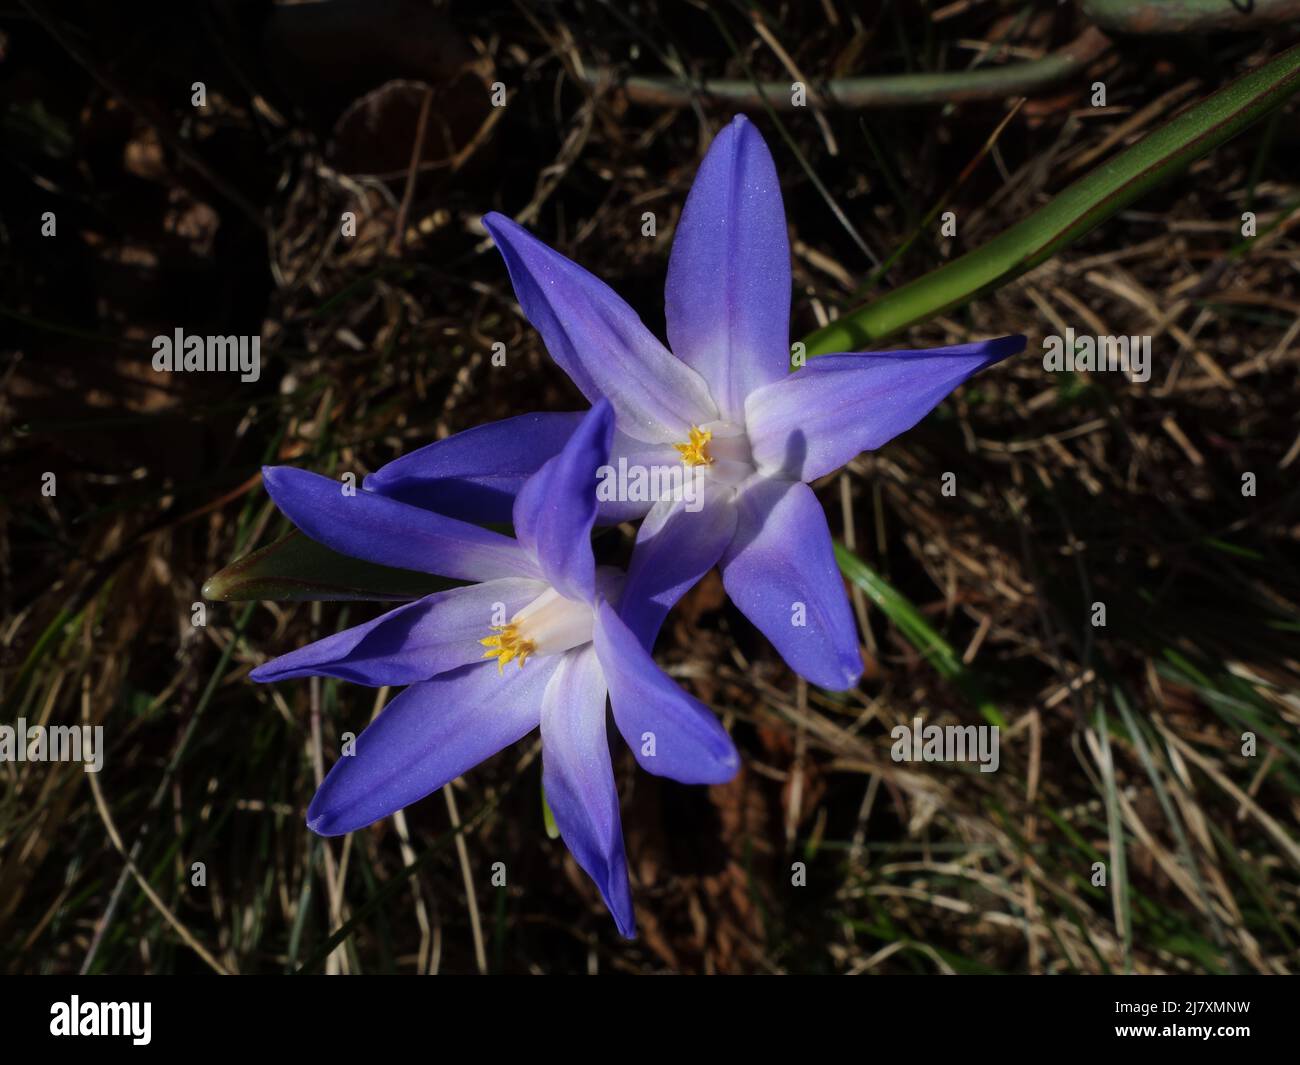 Chionodoxa forbesii is very similar to the Scilla siberica, but the color of the Snow Star petals is white in the middle and then blue. Stock Photo